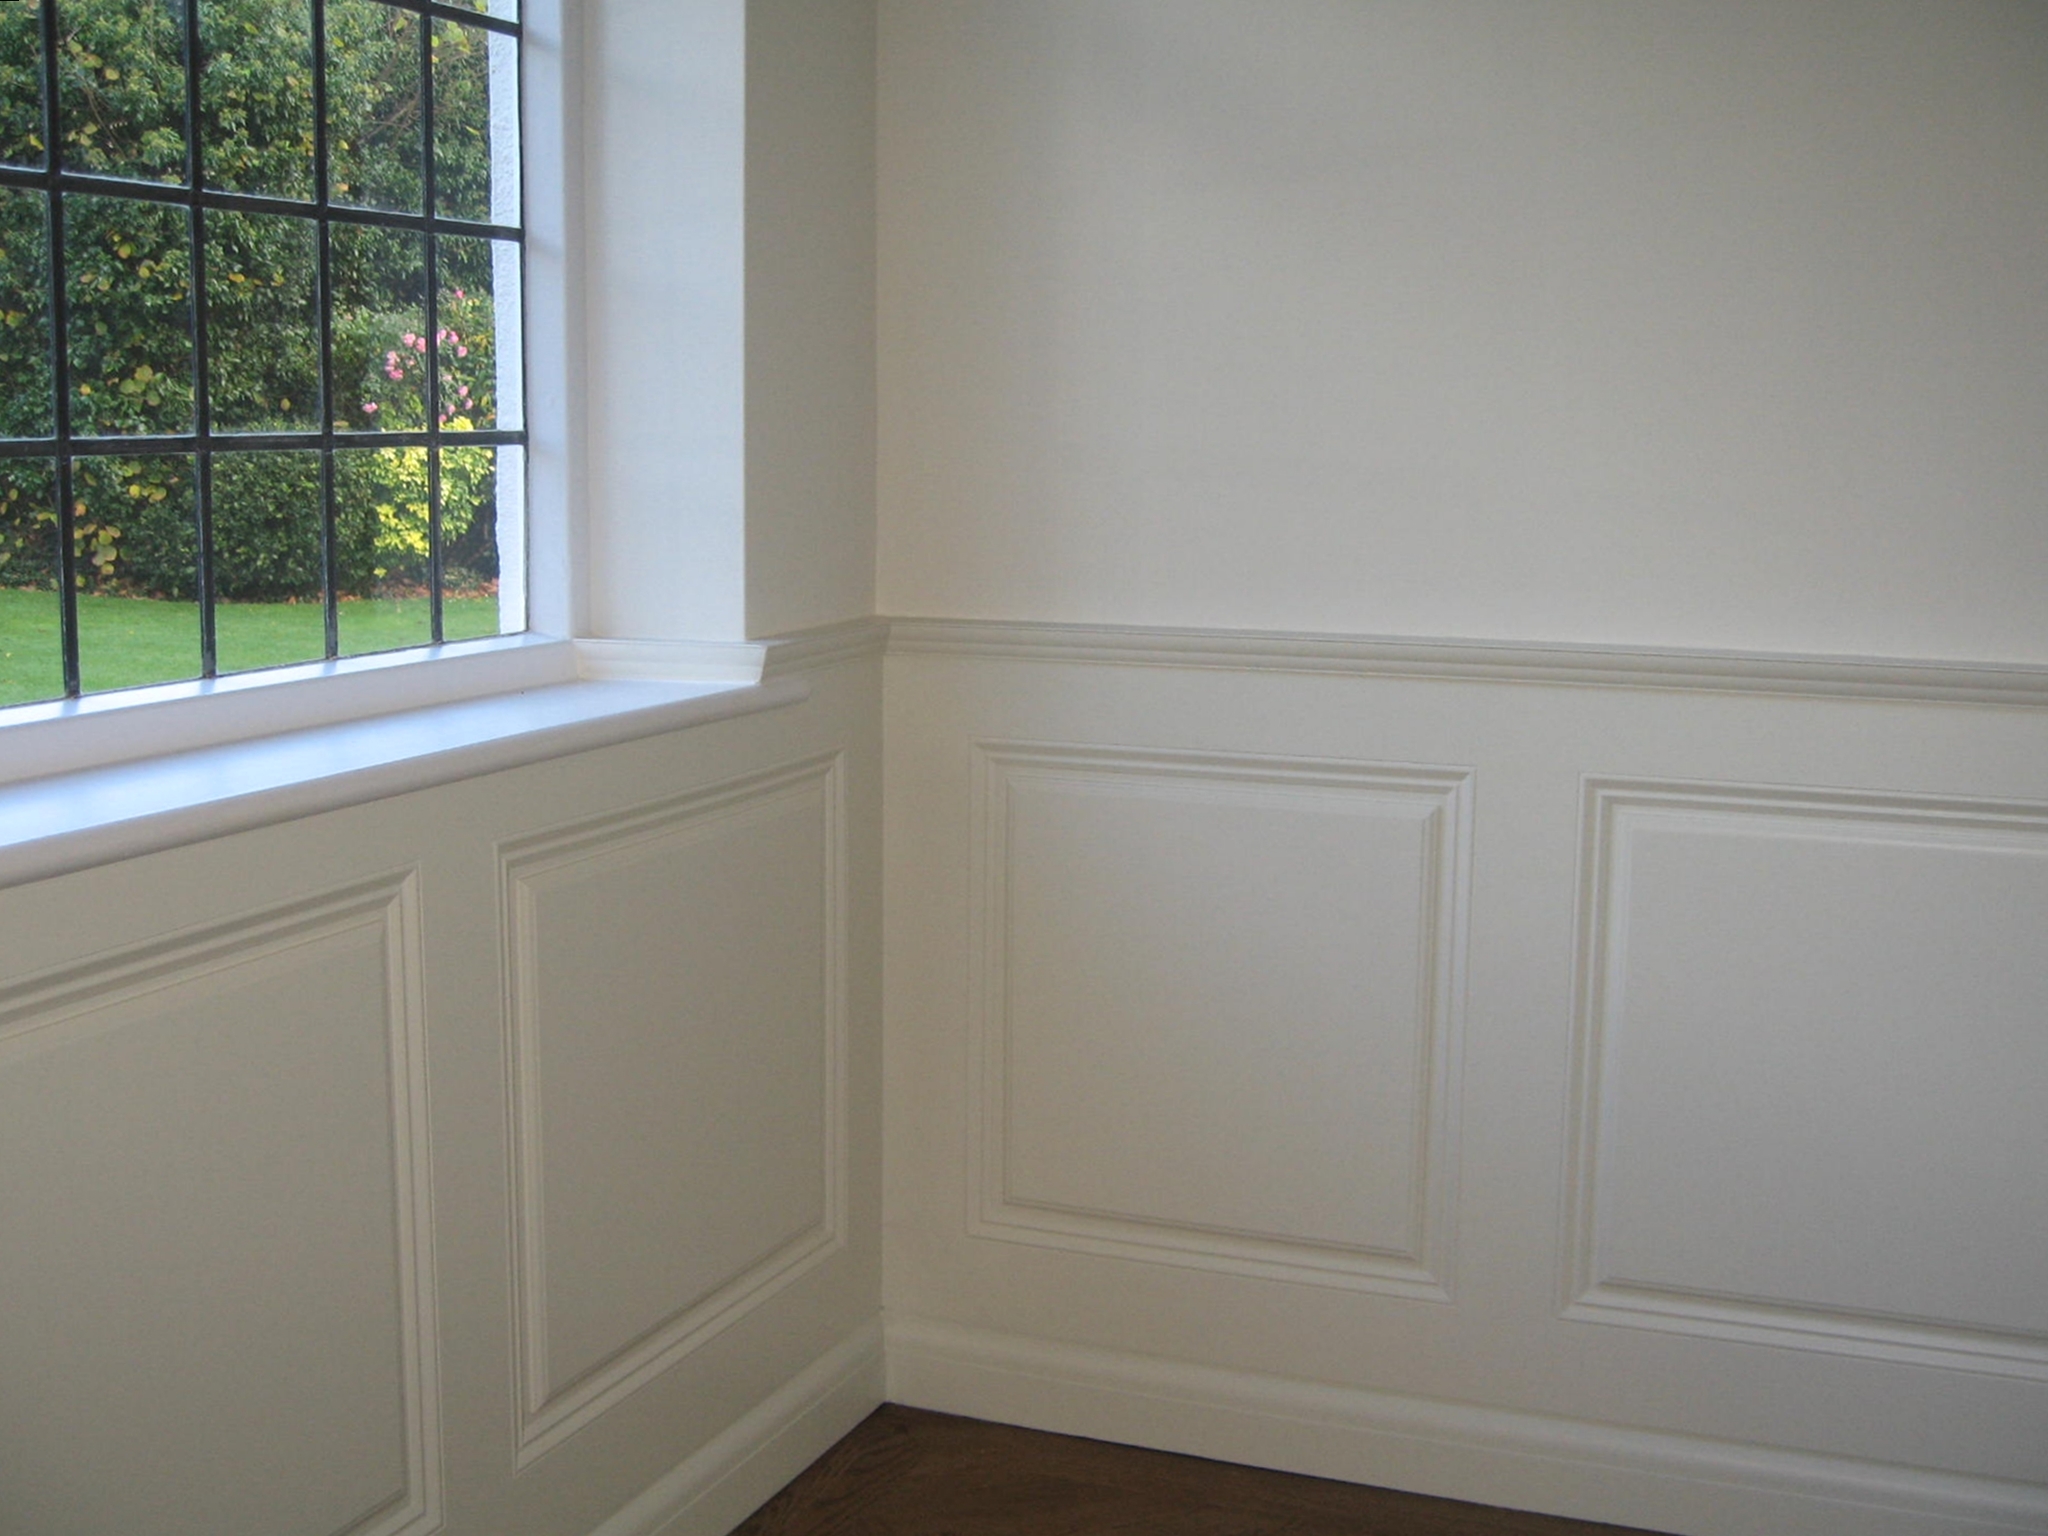 Renaissance Wall Panels Fitted To A Dado Height And Painted In White